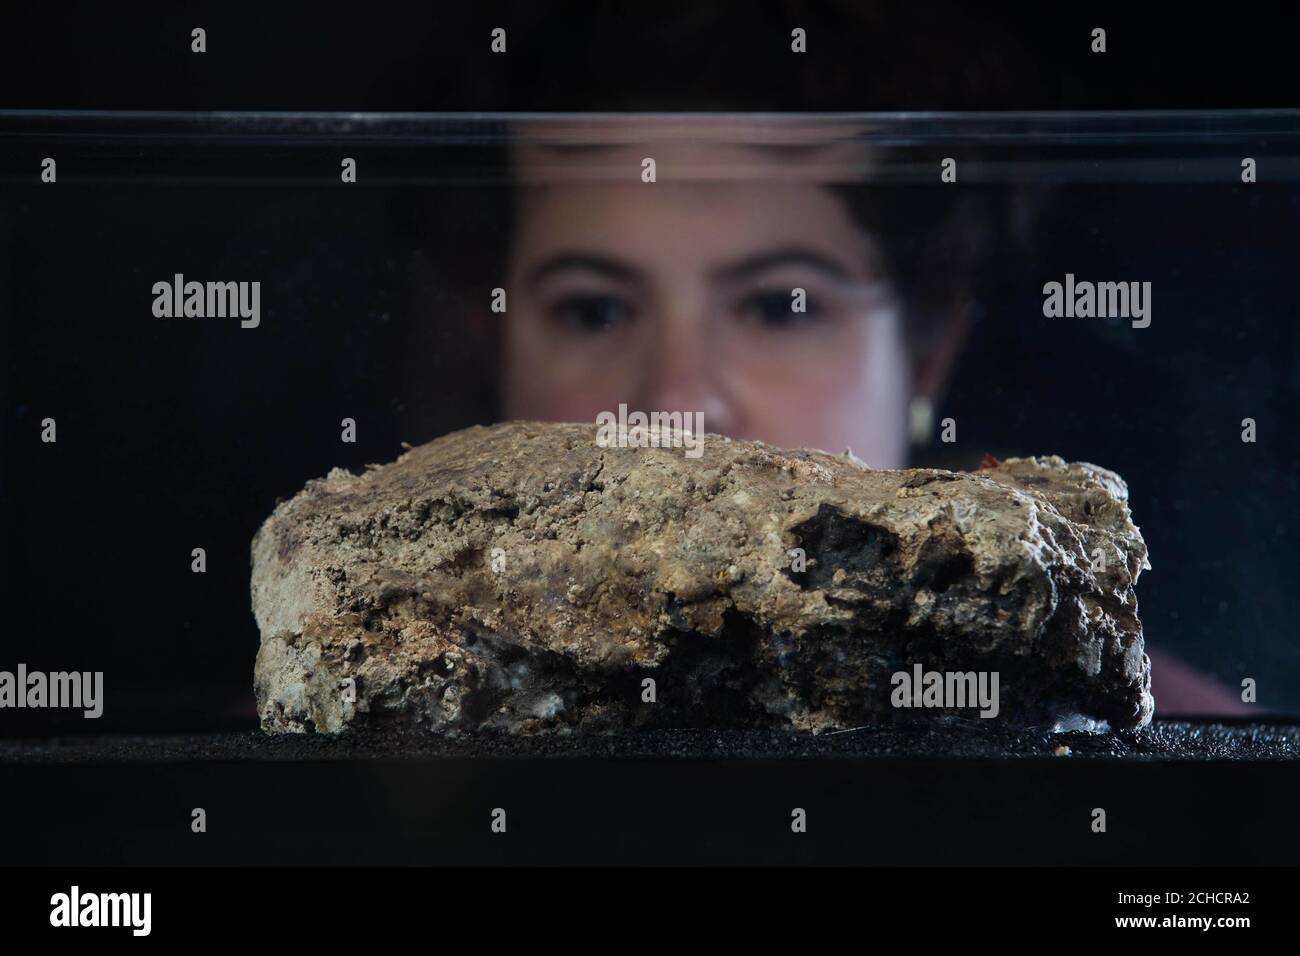 EDITORIAL USE ONLY Katie Balcombe looks at the last remaining piece of a monster fatberg that was discovered in Whitechapel sewers last September and goes on display on Friday at the Museum of London. PRESS ASSOCIATION. Photo. Picture date: Thursday February 8, 2018. Once weighing a 130 tonnes, the equivalent of 11 double decker buses and stretching over 250 metres, the museum has worked with industry experts and carried out scientific analysis in order to conserve a sample to display in specially sealed units. The 'Fatberg!' display continues until July 1st. Photo credit should read: David Pa Stock Photo